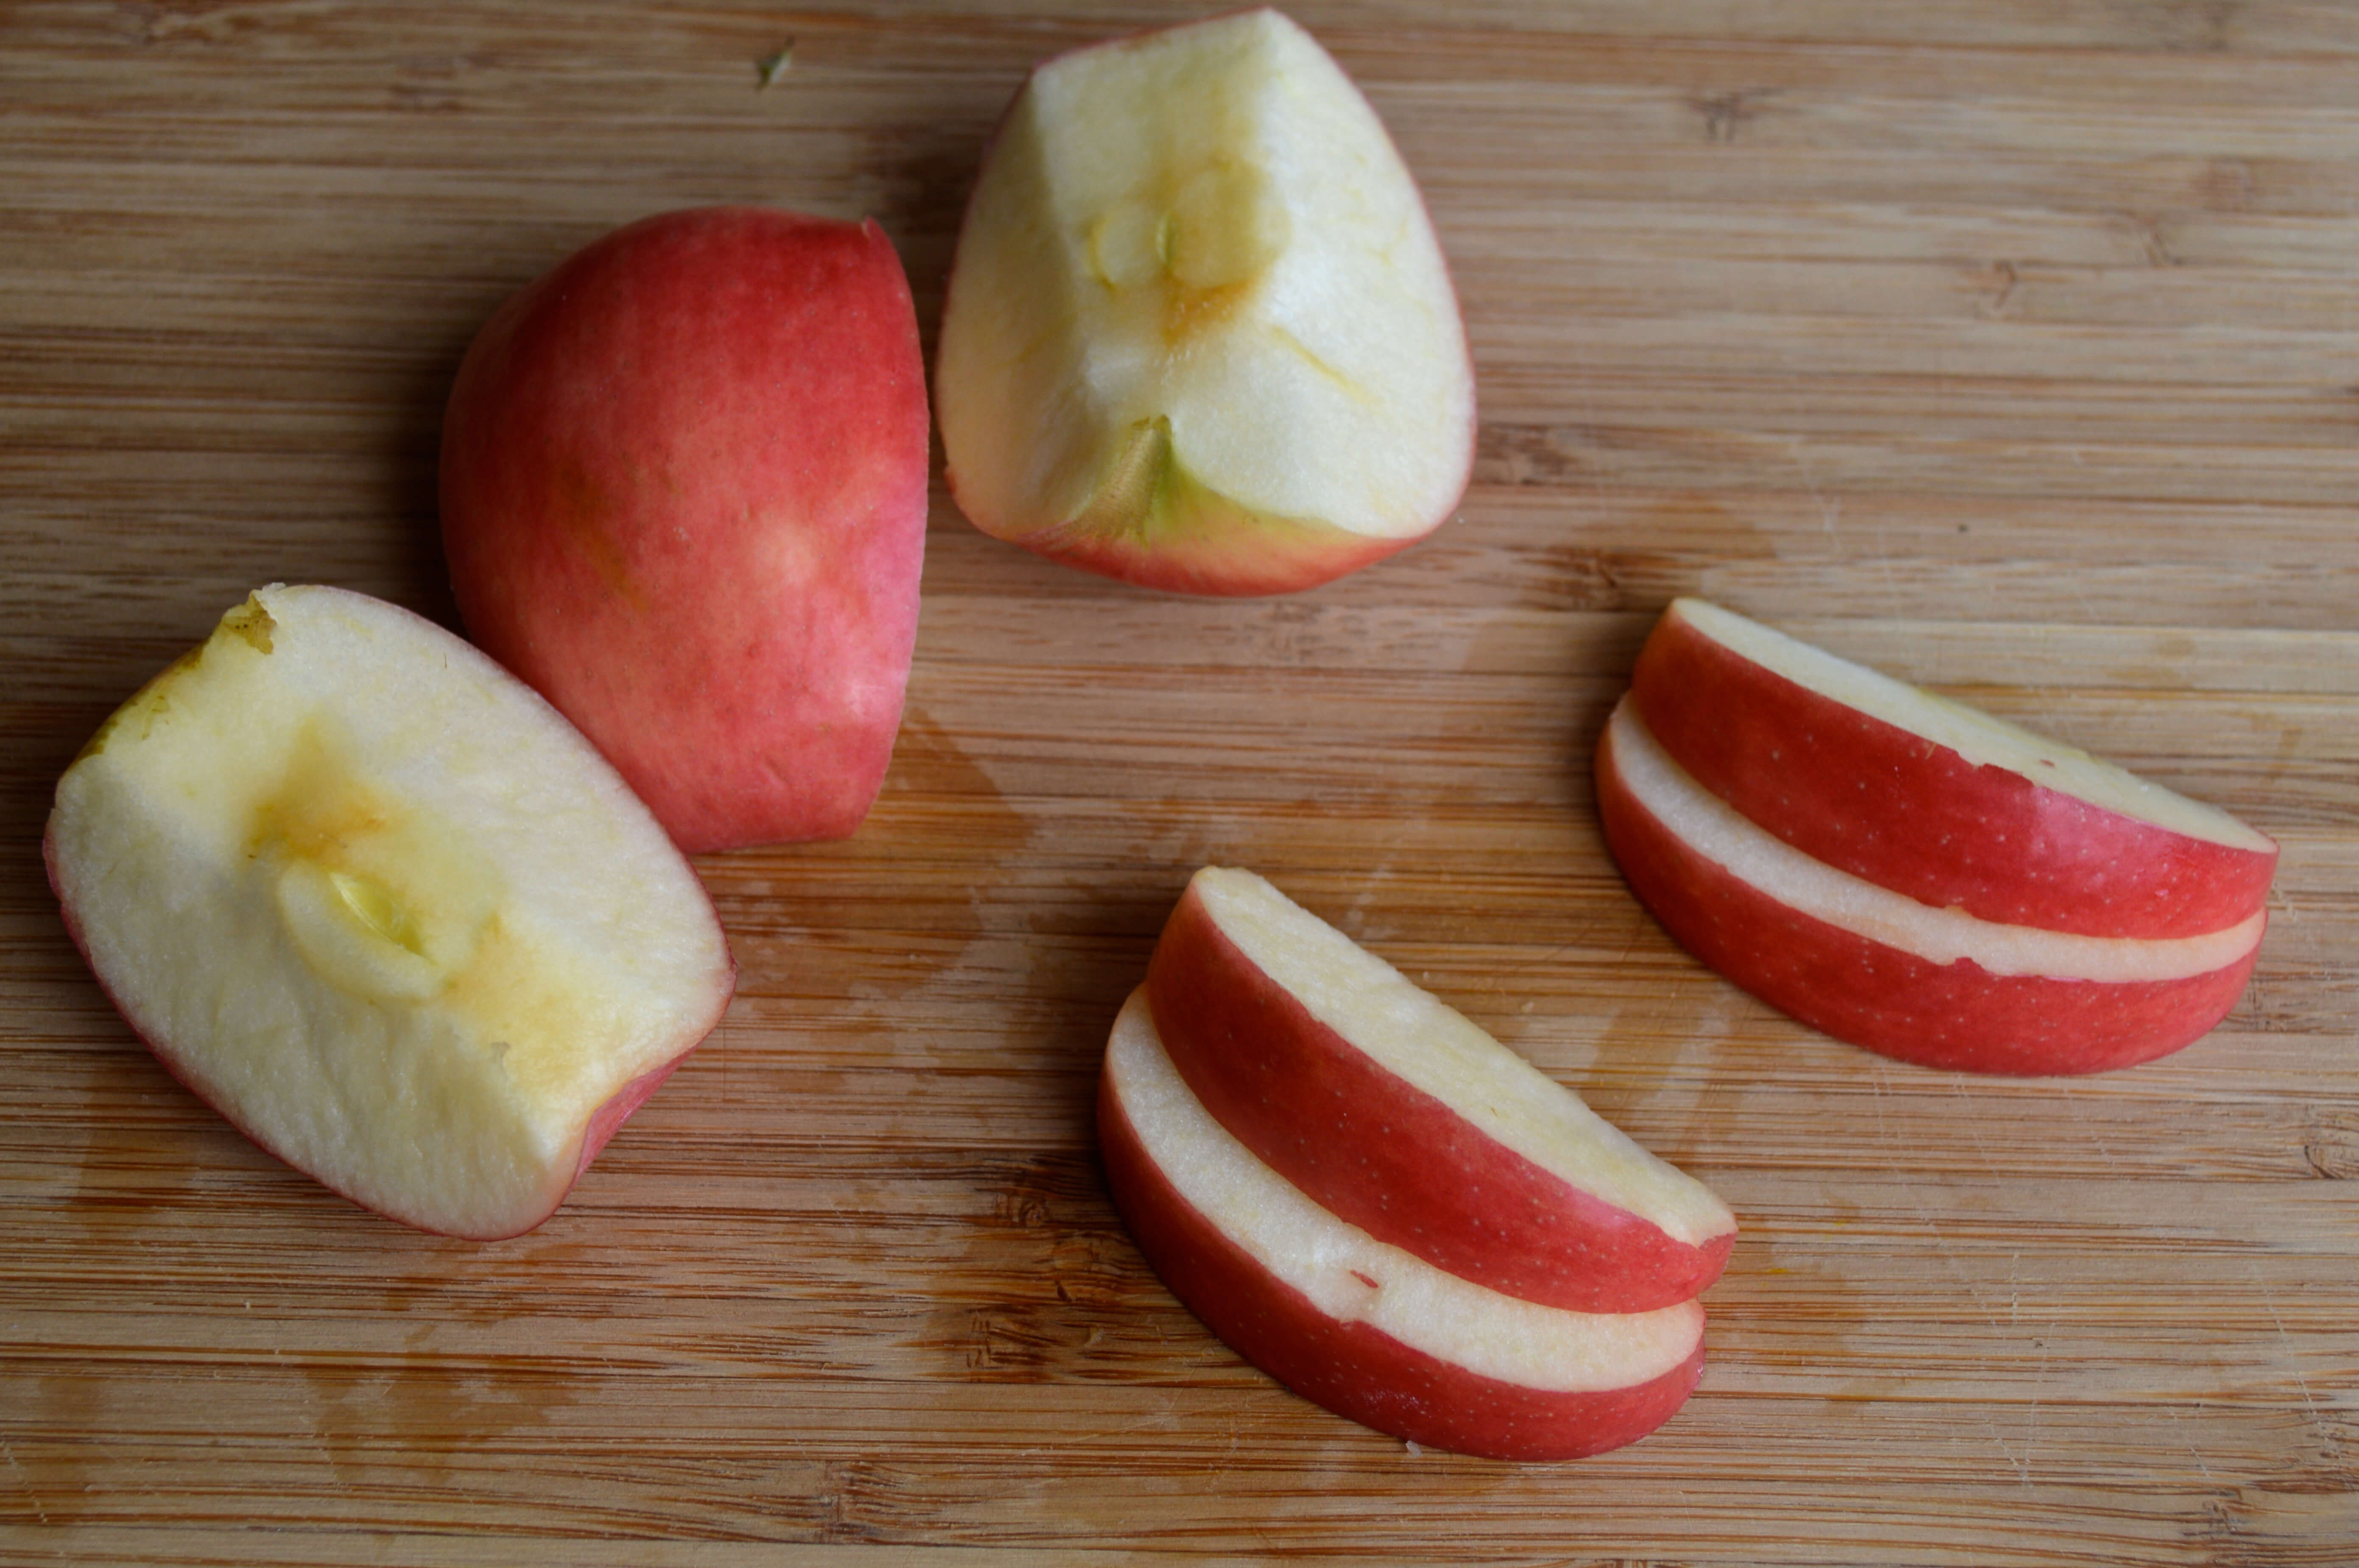 A chopping board with some quartered apples next to some apple slices/wedges